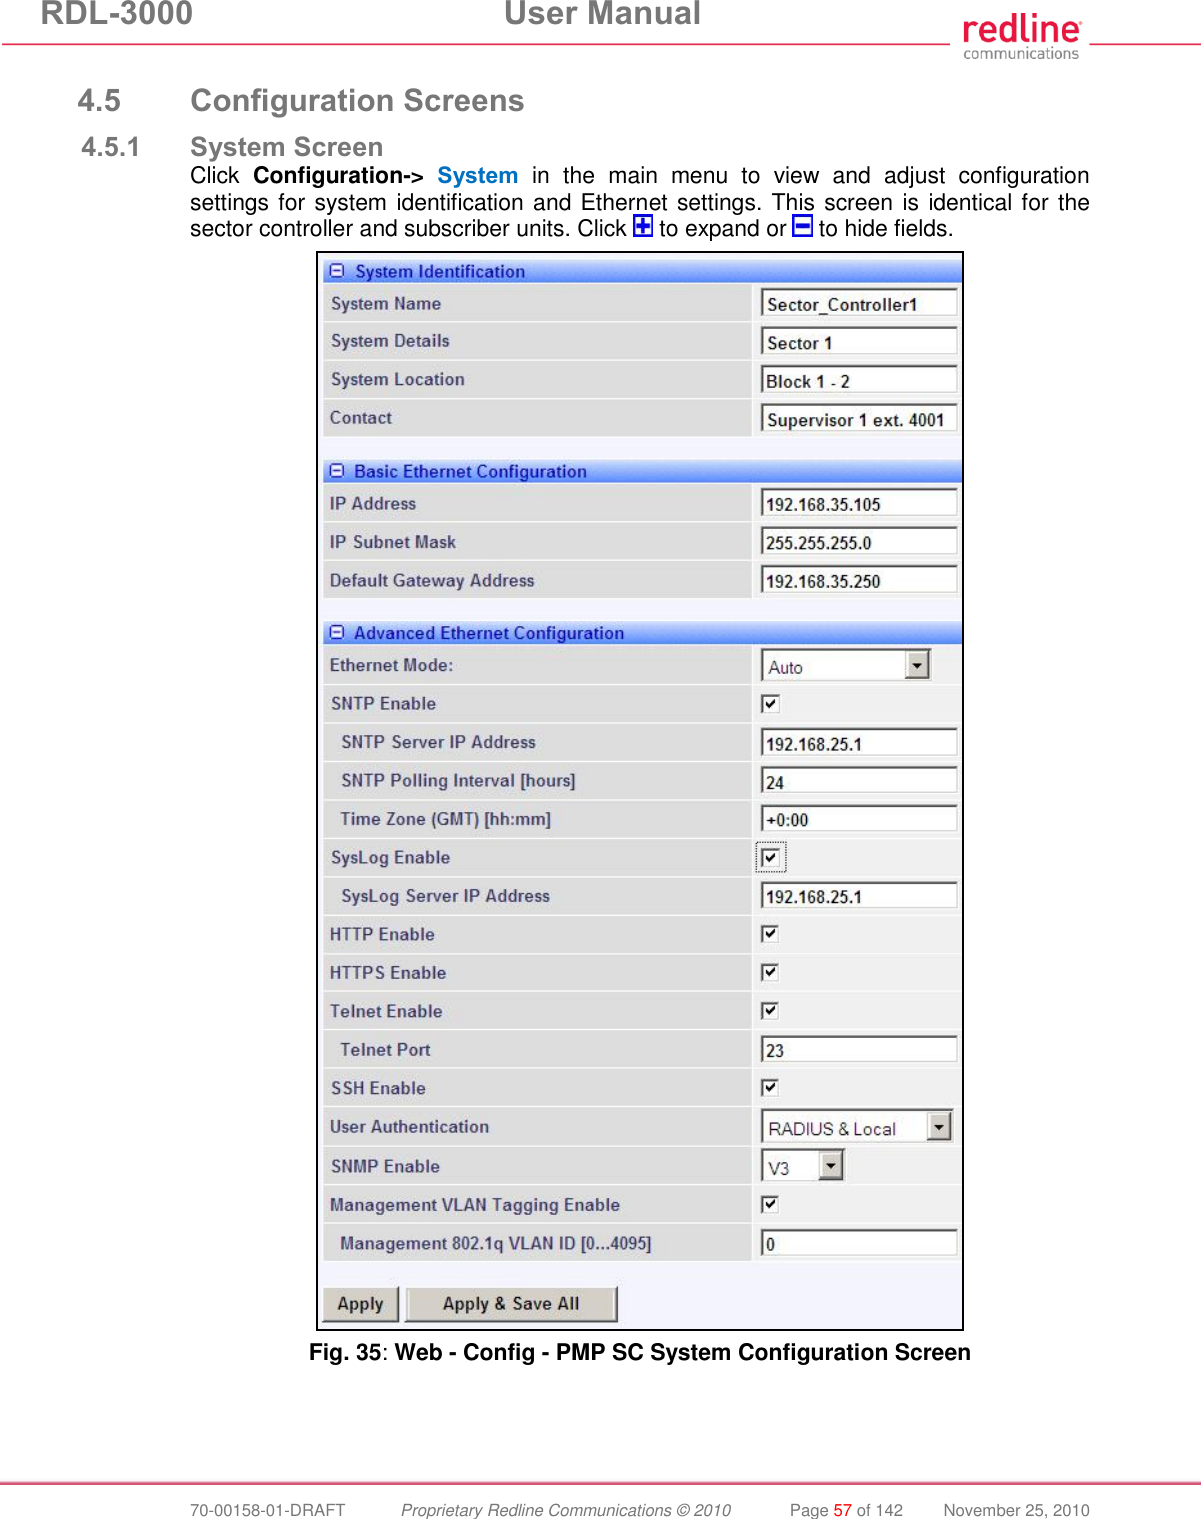 RDL-3000  User Manual  70-00158-01-DRAFT  Proprietary Redline Communications © 2010  Page 57 of 142  November 25, 2010  4.5 Configuration Screens 4.5.1 System Screen Click  Configuration-&gt;  System in  the  main  menu  to  view  and  adjust  configuration settings for system identification and Ethernet settings. This screen is identical for the sector controller and subscriber units. Click   to expand or   to hide fields.  Fig. 35: Web - Config - PMP SC System Configuration Screen 